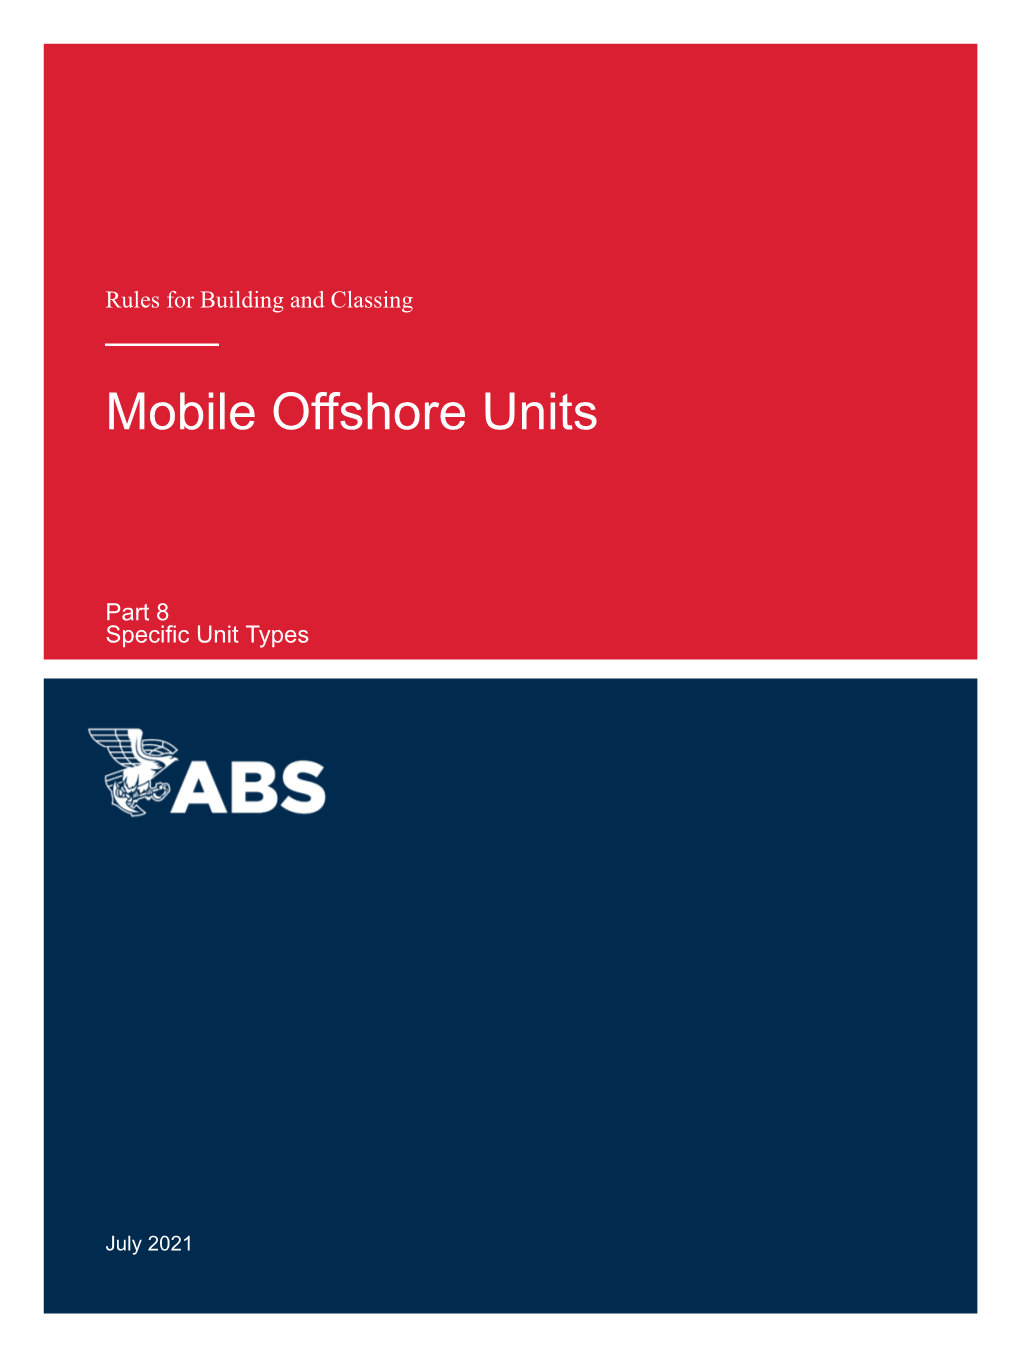 Rules for Building and Classing Mobile Offshore Units 2021